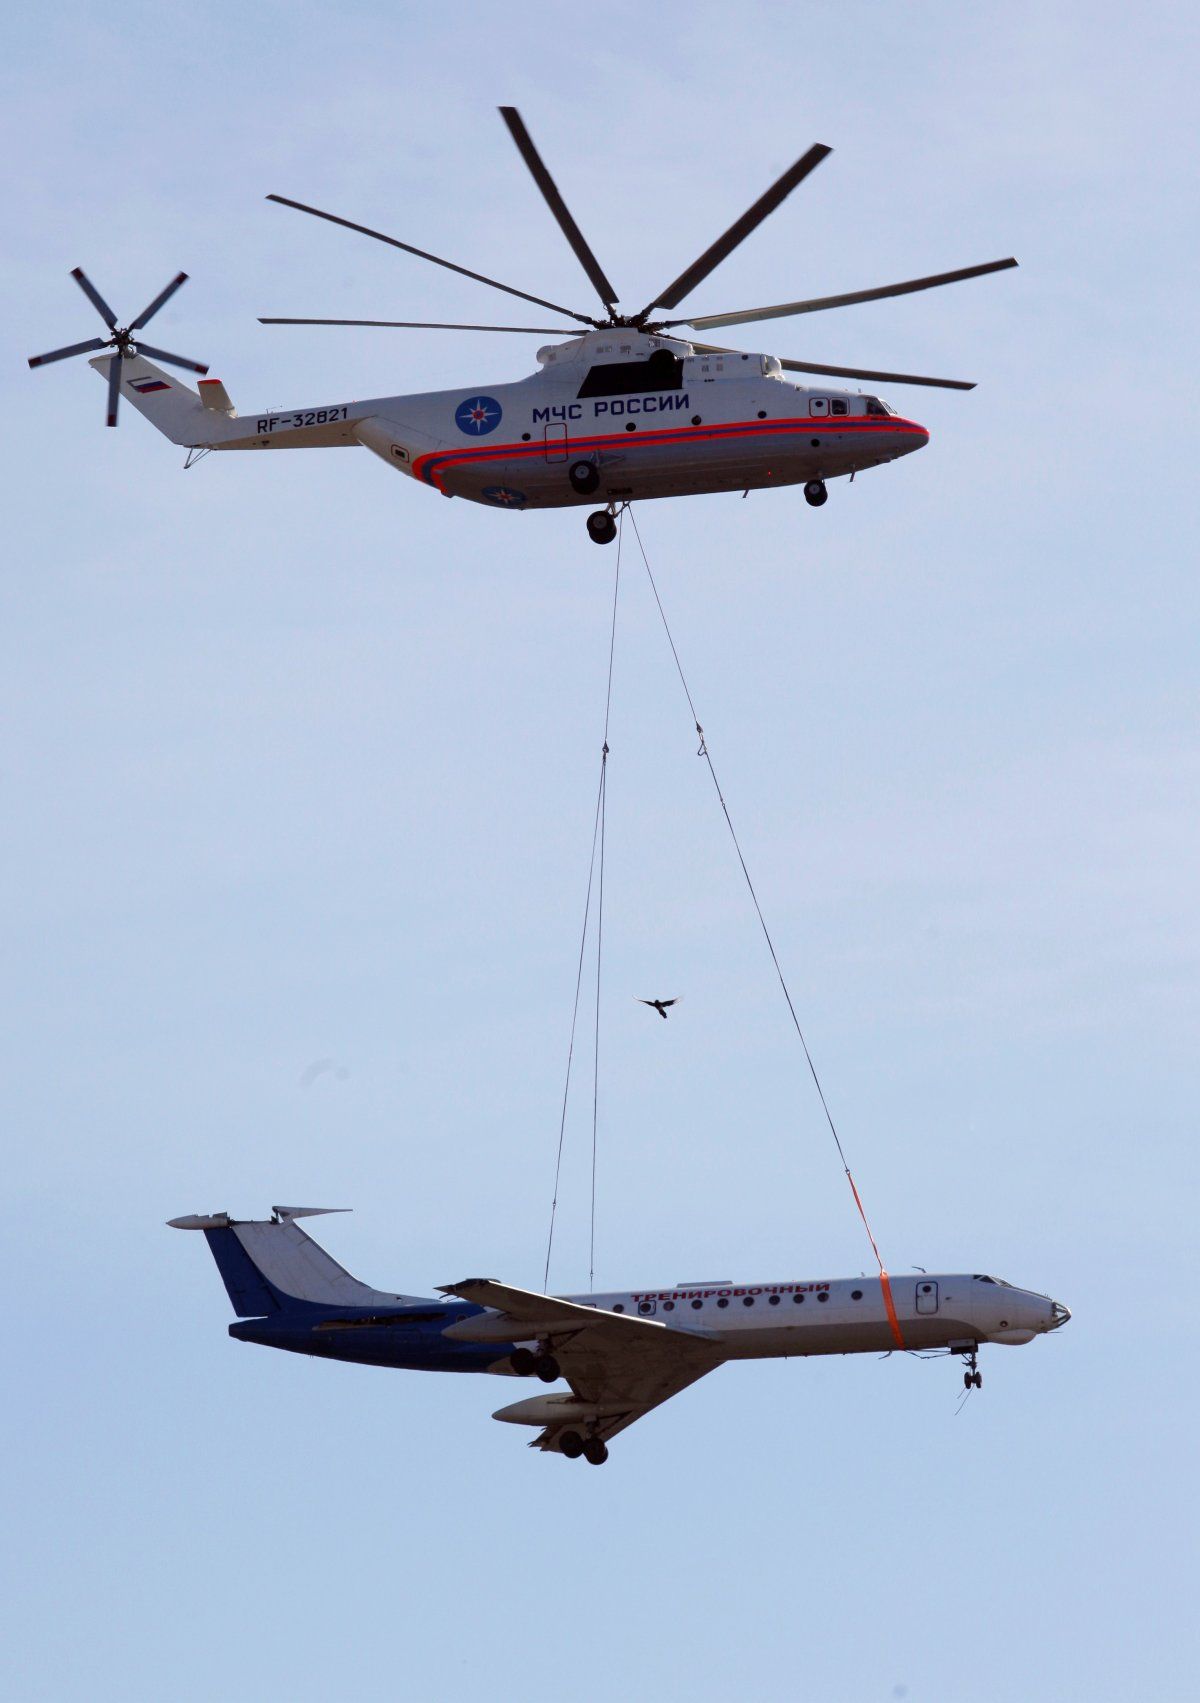 The world's largest helicopter can lift an airliner with remarkable ease